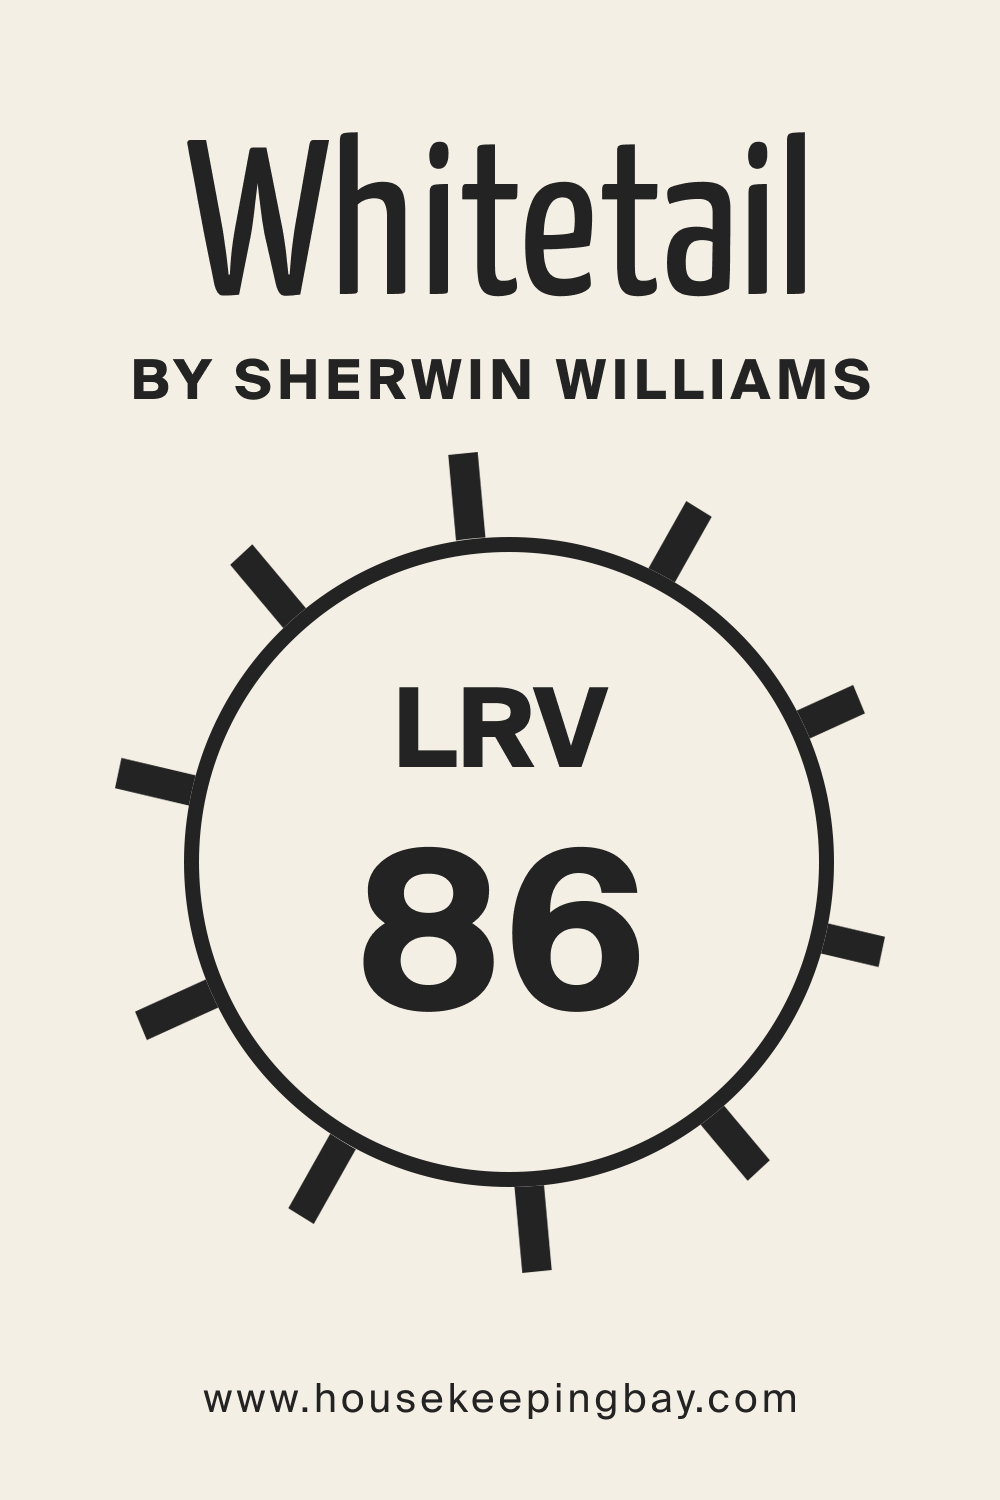 SW Whitetail by Sherwin Williams. LRV – 86